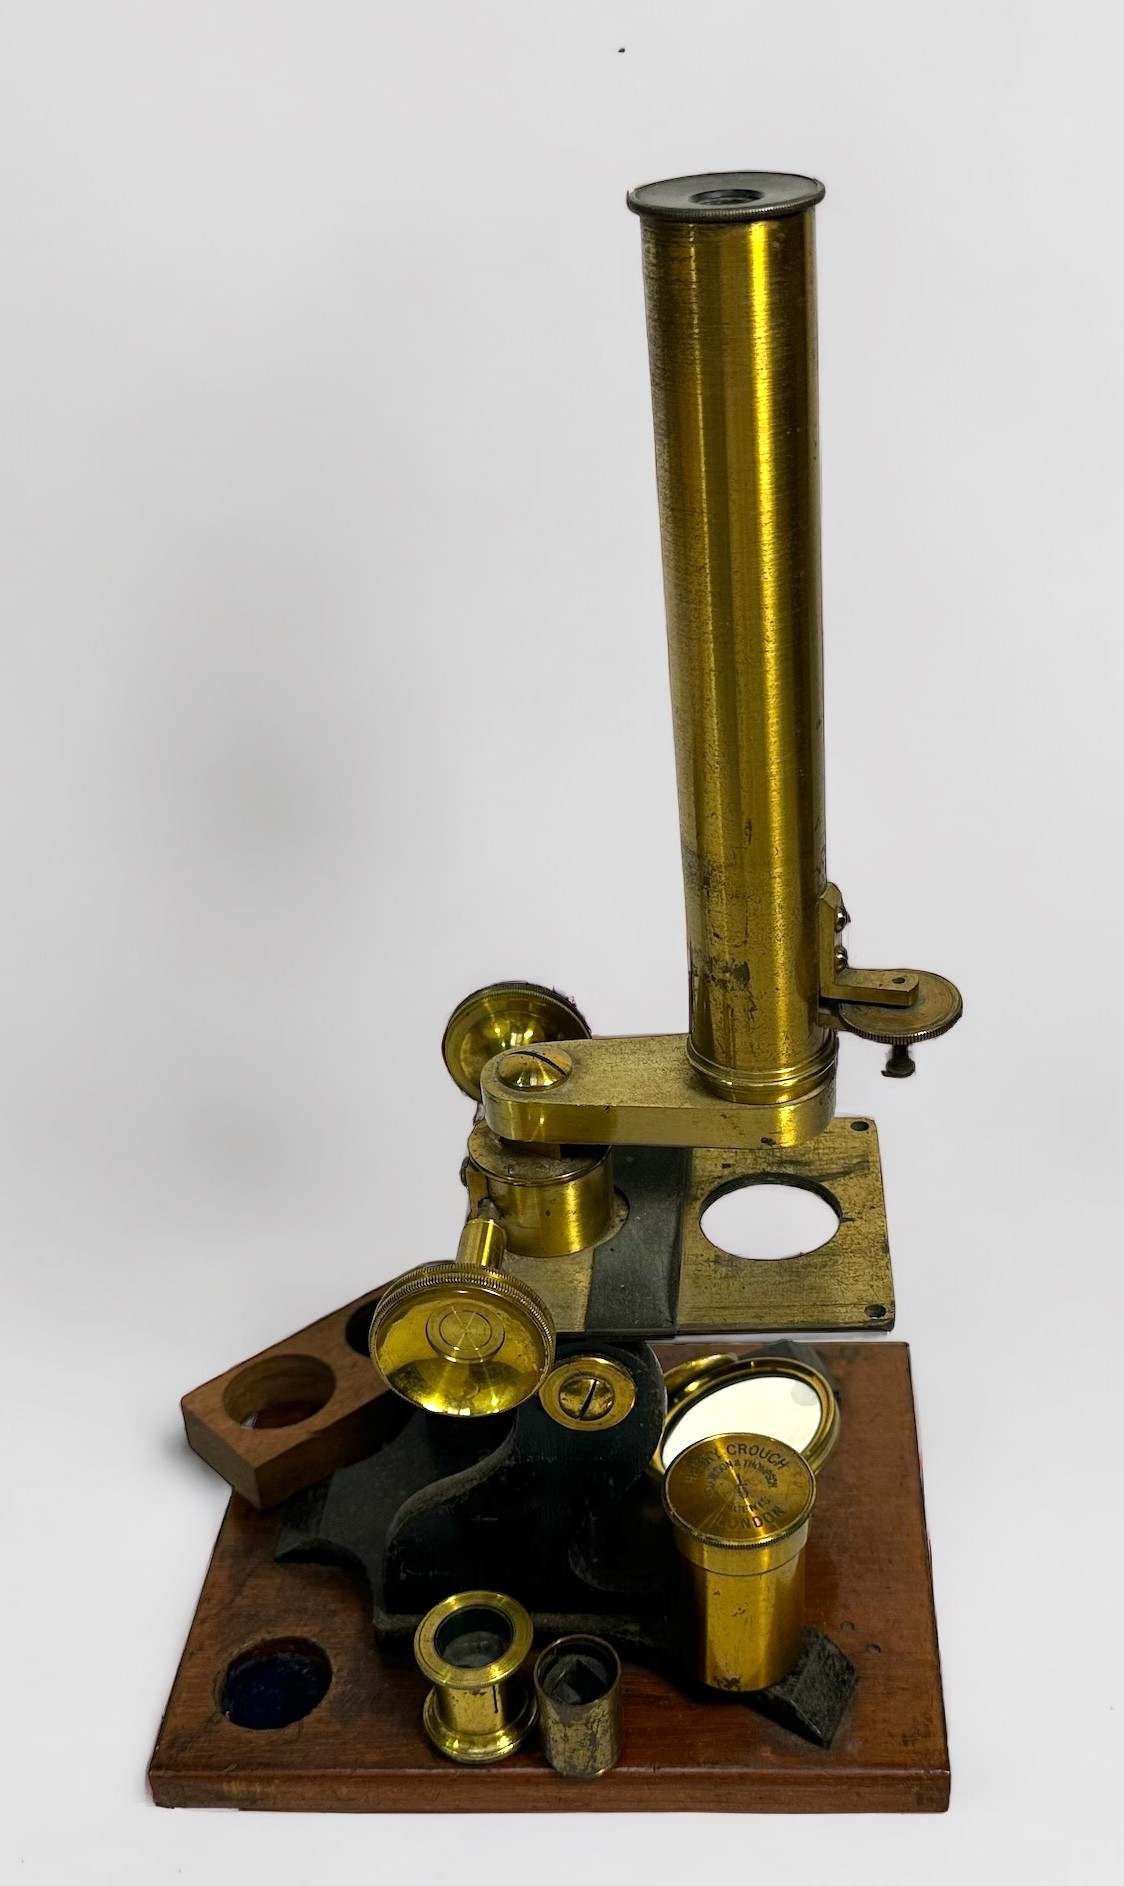 A Microscope by Henry Crouch, lacquered brassware and black frame, with selection of glass - Image 2 of 5